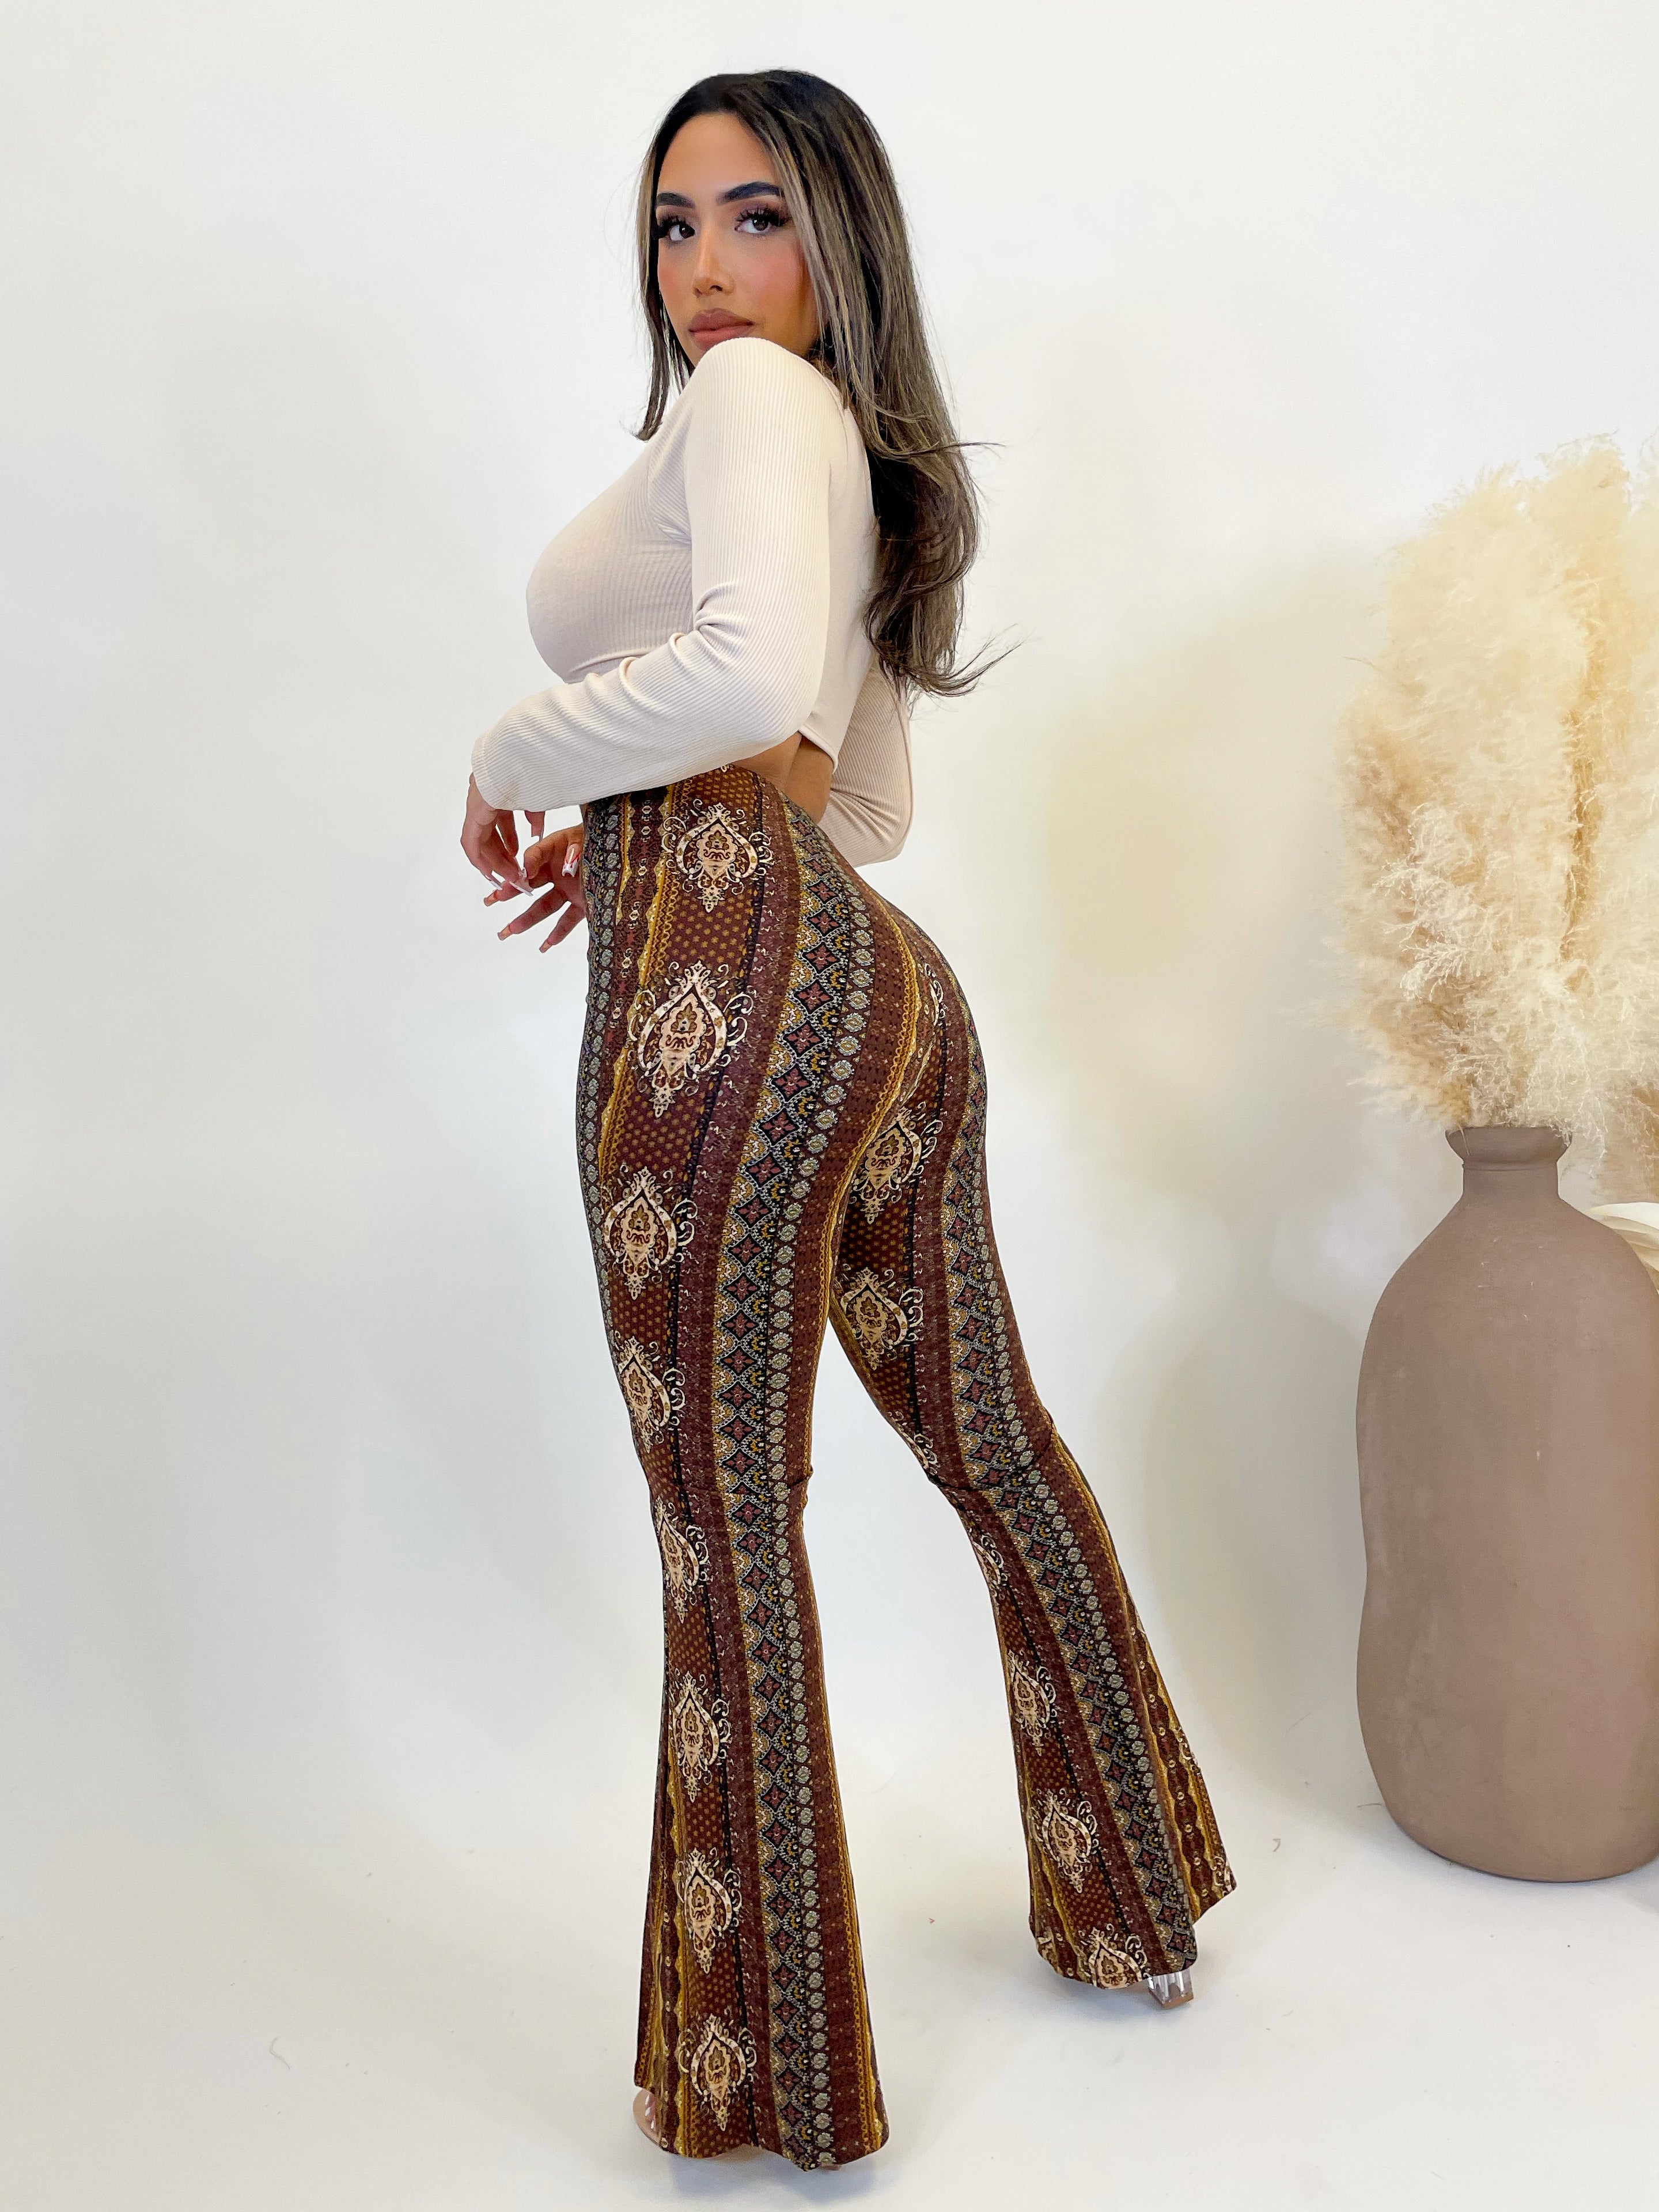 The Forbidden Pants  Printed flare pants, Pants for women, Flare pants